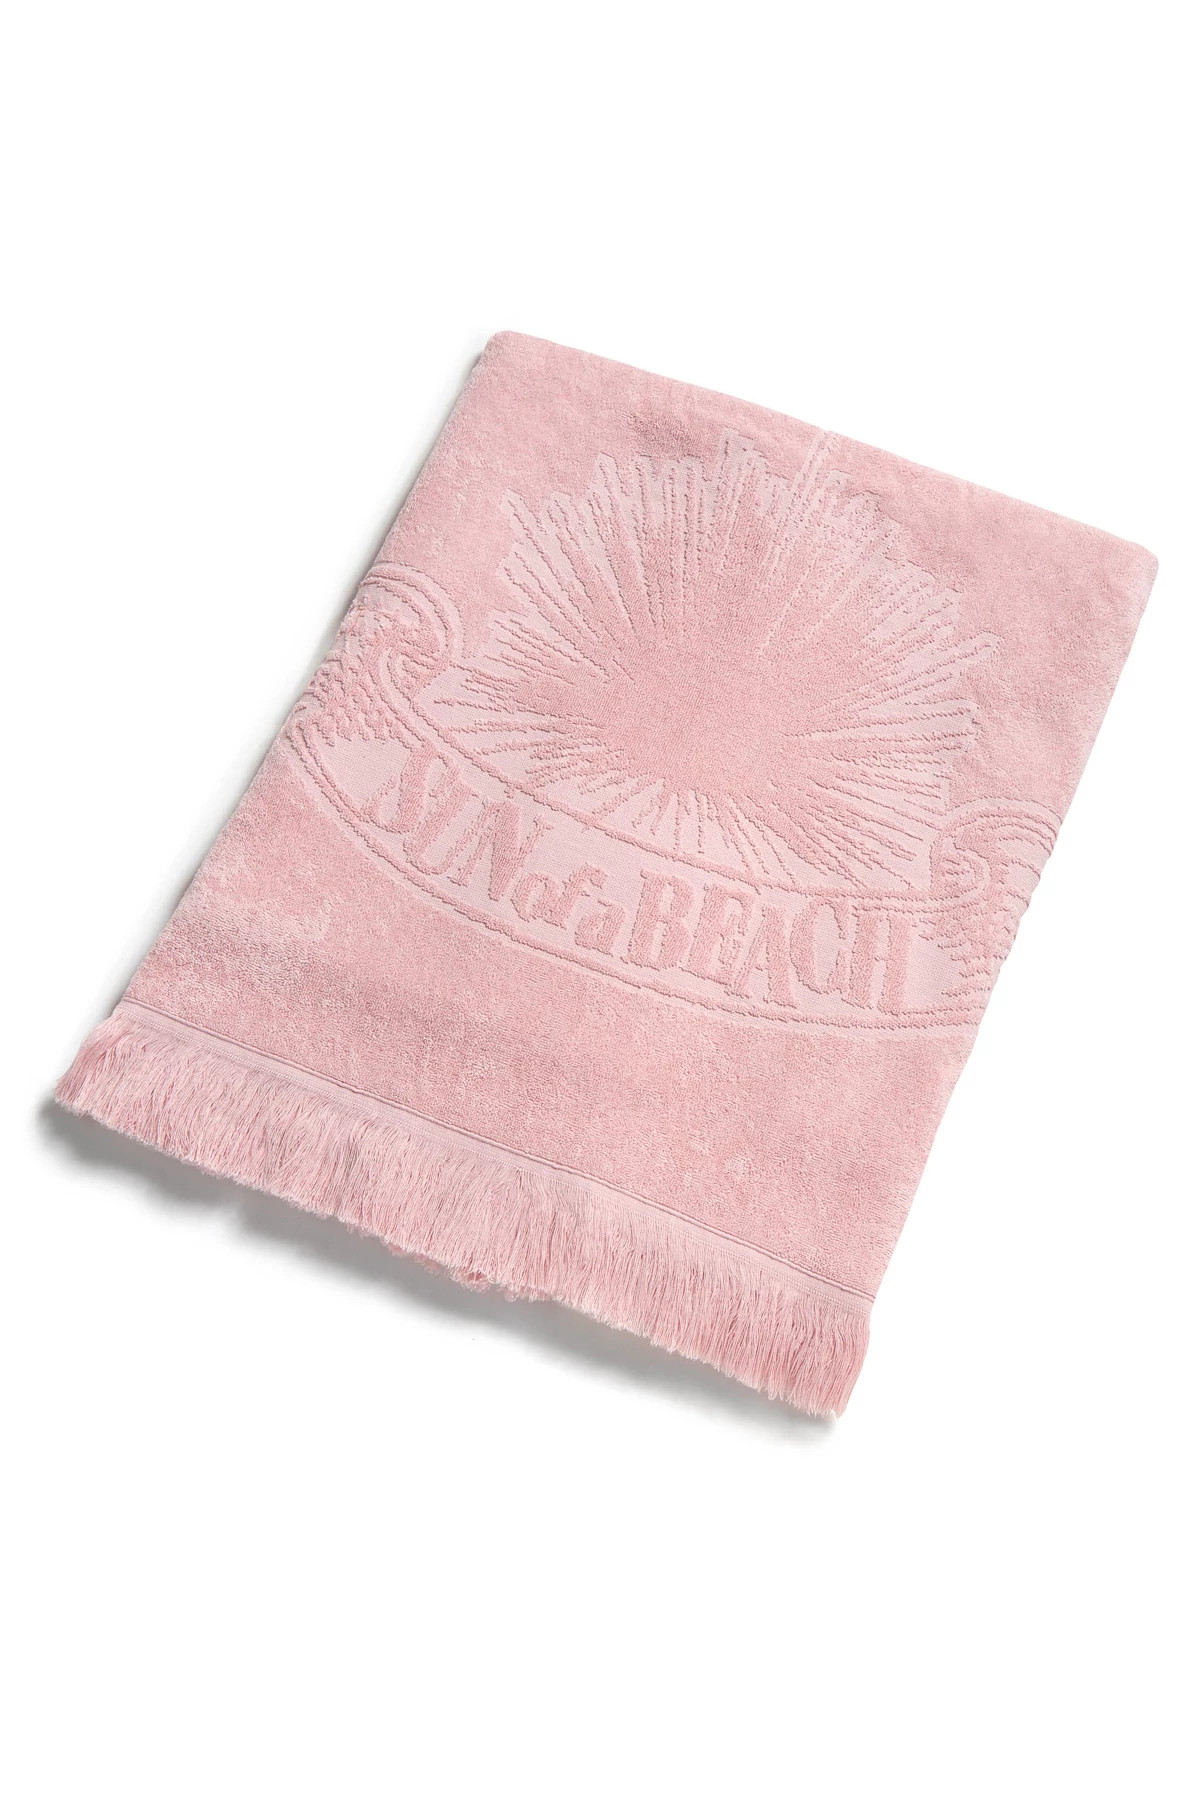 JUST PINK Just Pink Monochrome Beach Towel image number 3